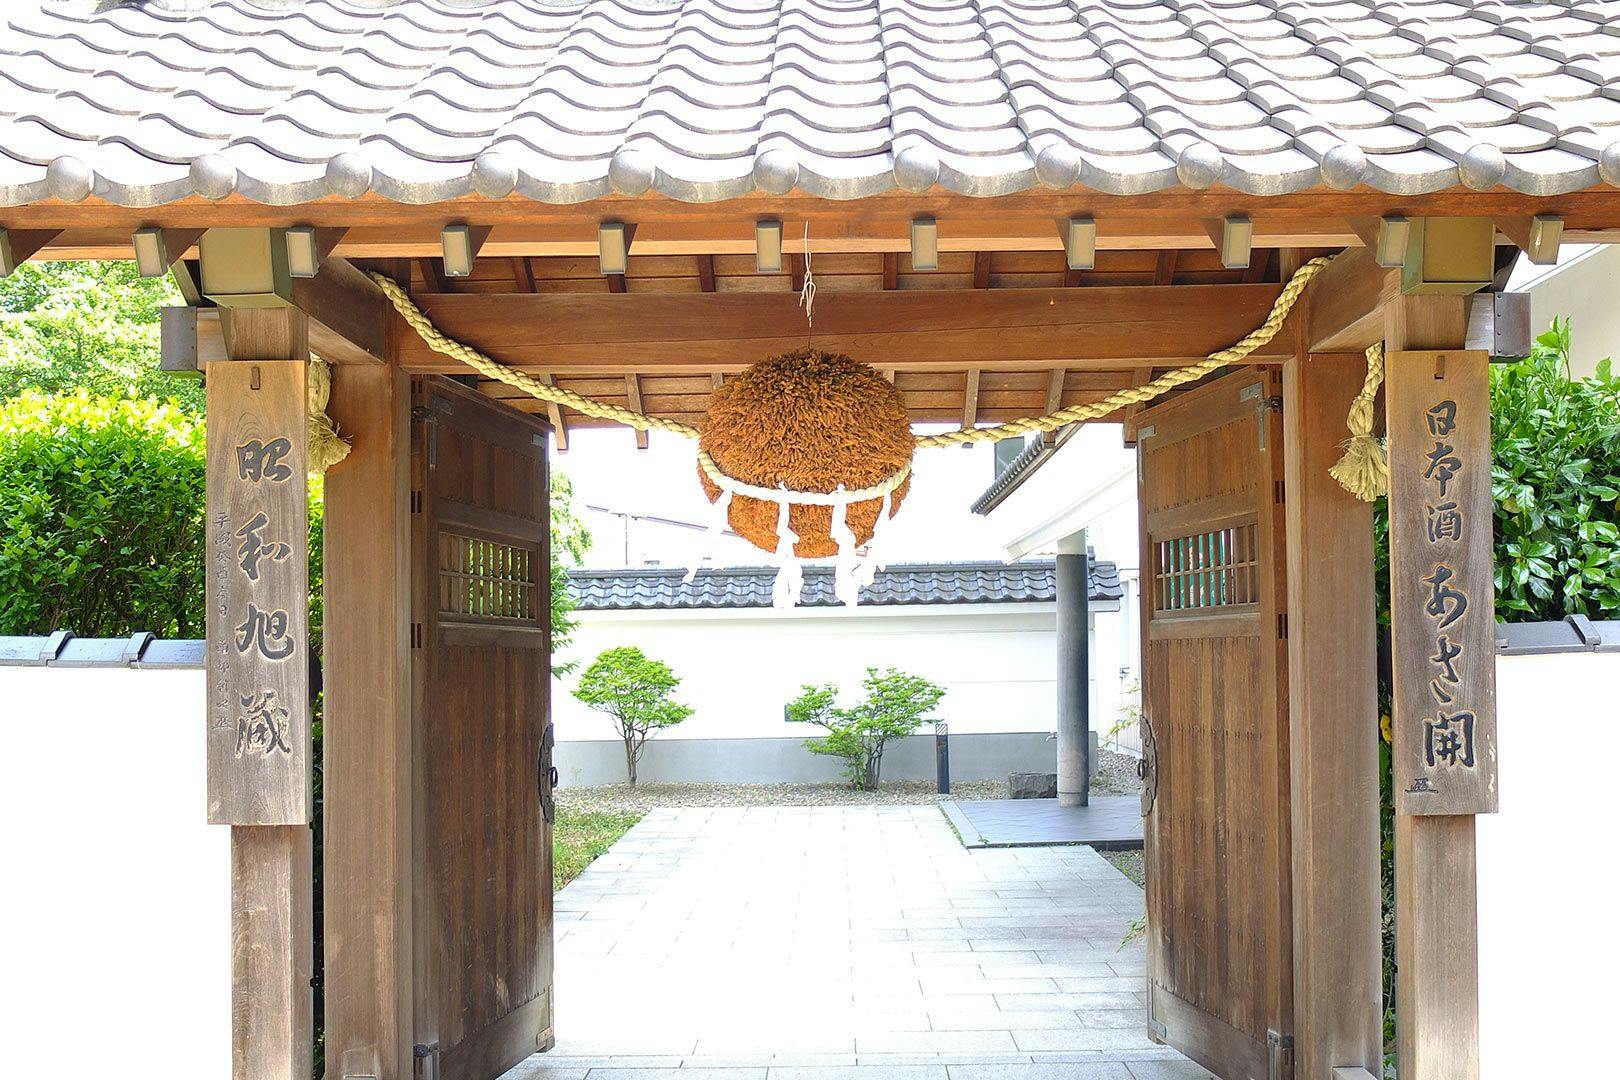 A Japanese sake brewery entrance is marked by a cedar ball called “sugidama”